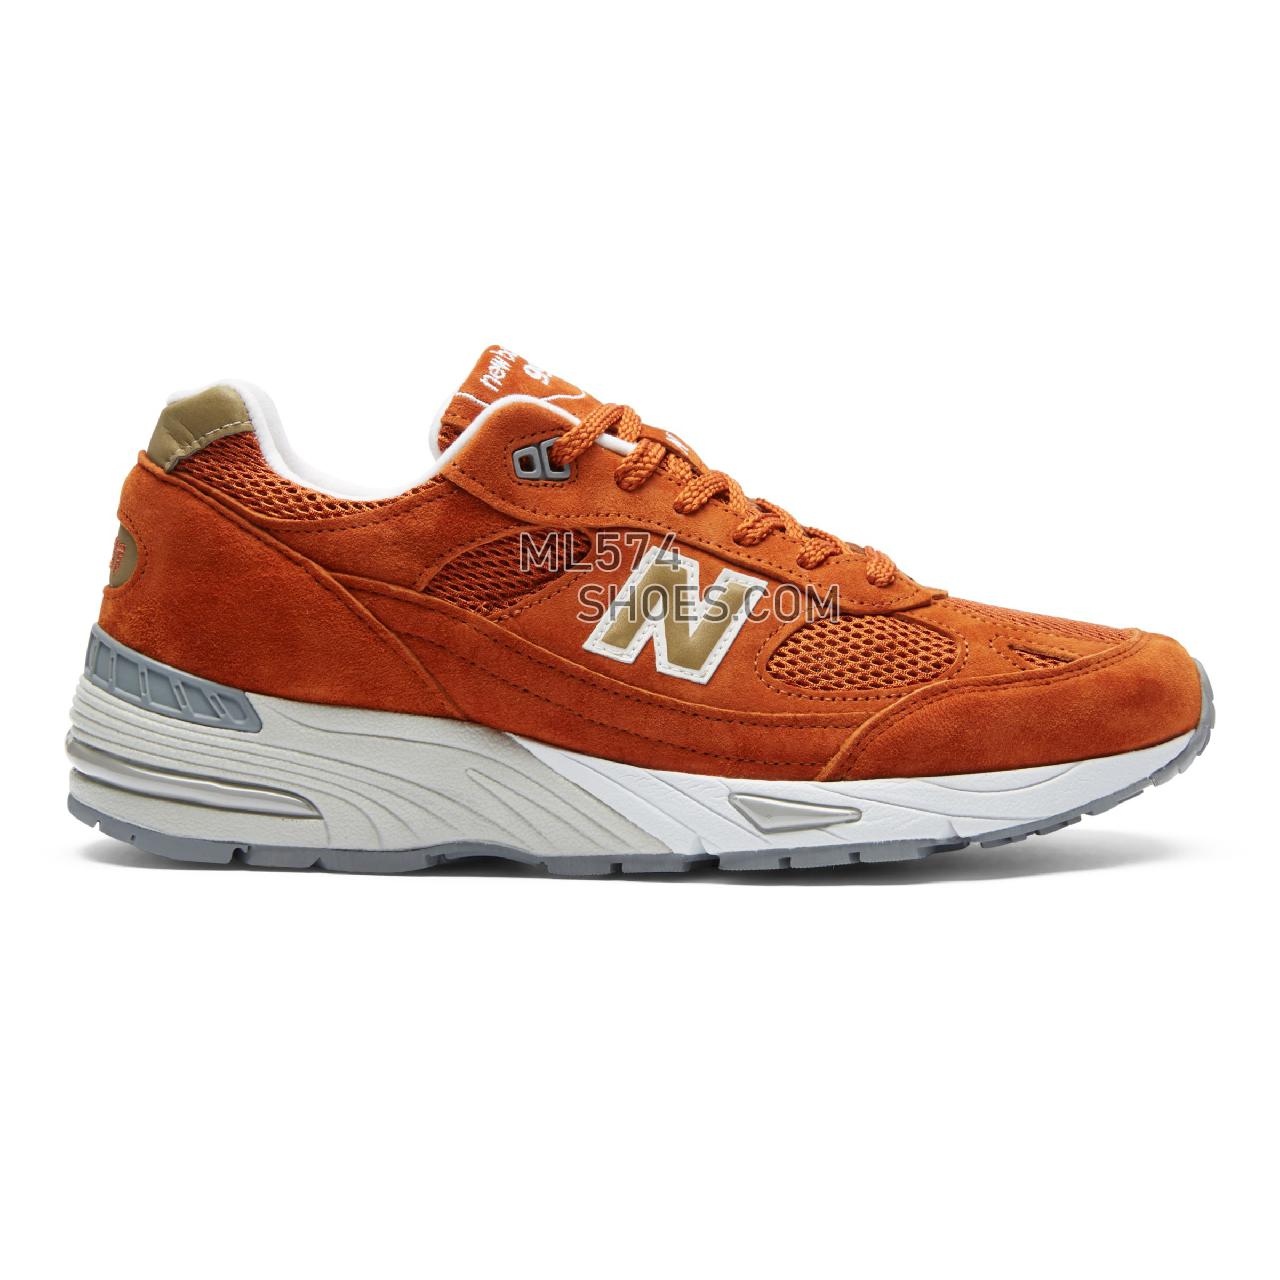 New Balance Made in UK 991 - Men's 991 Made in UK Classic M991-MP - Burnt Orange with Gold - M991SE